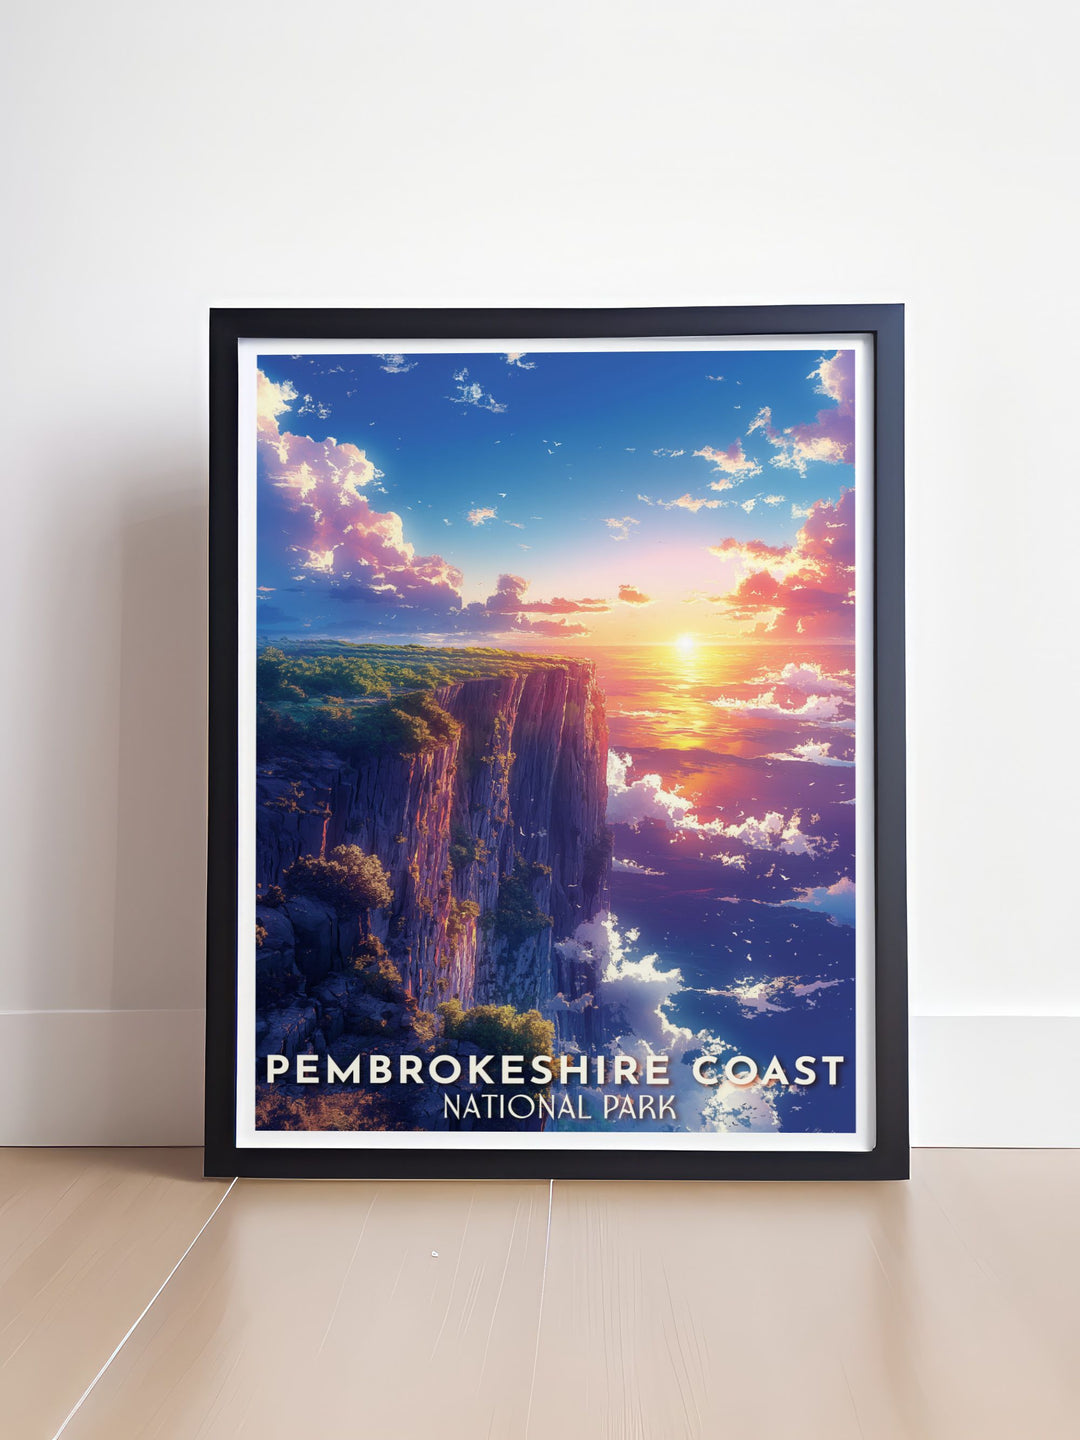 Cliff gifts featuring the stunning Pembrokeshire Coast in Wales with retro travel poster design ideal for birthdays anniversaries or special occasions providing a timeless piece of wall art for any nature or travel lover.